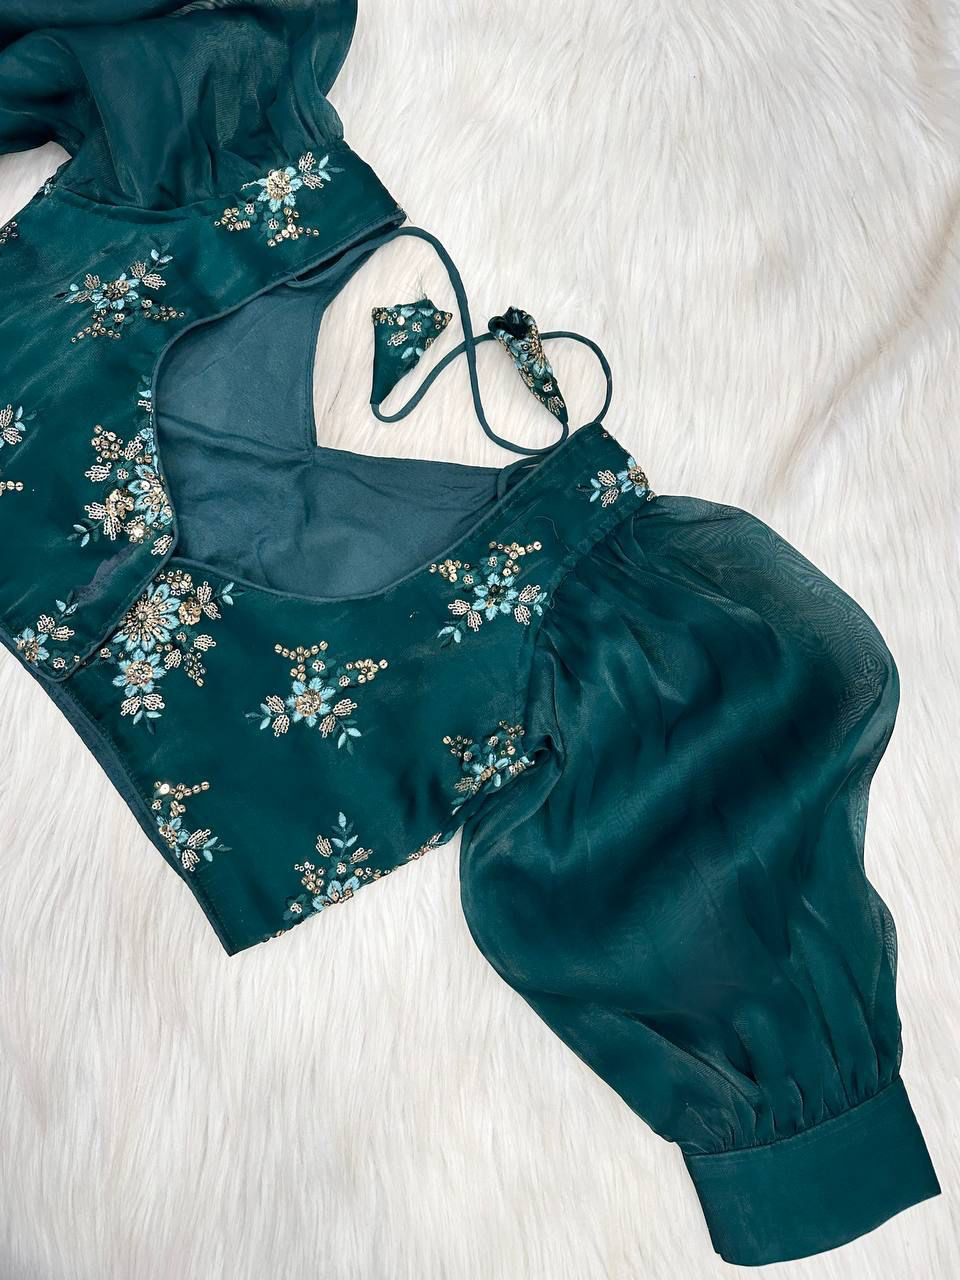 Blooming Organza Blouse In Teal Green